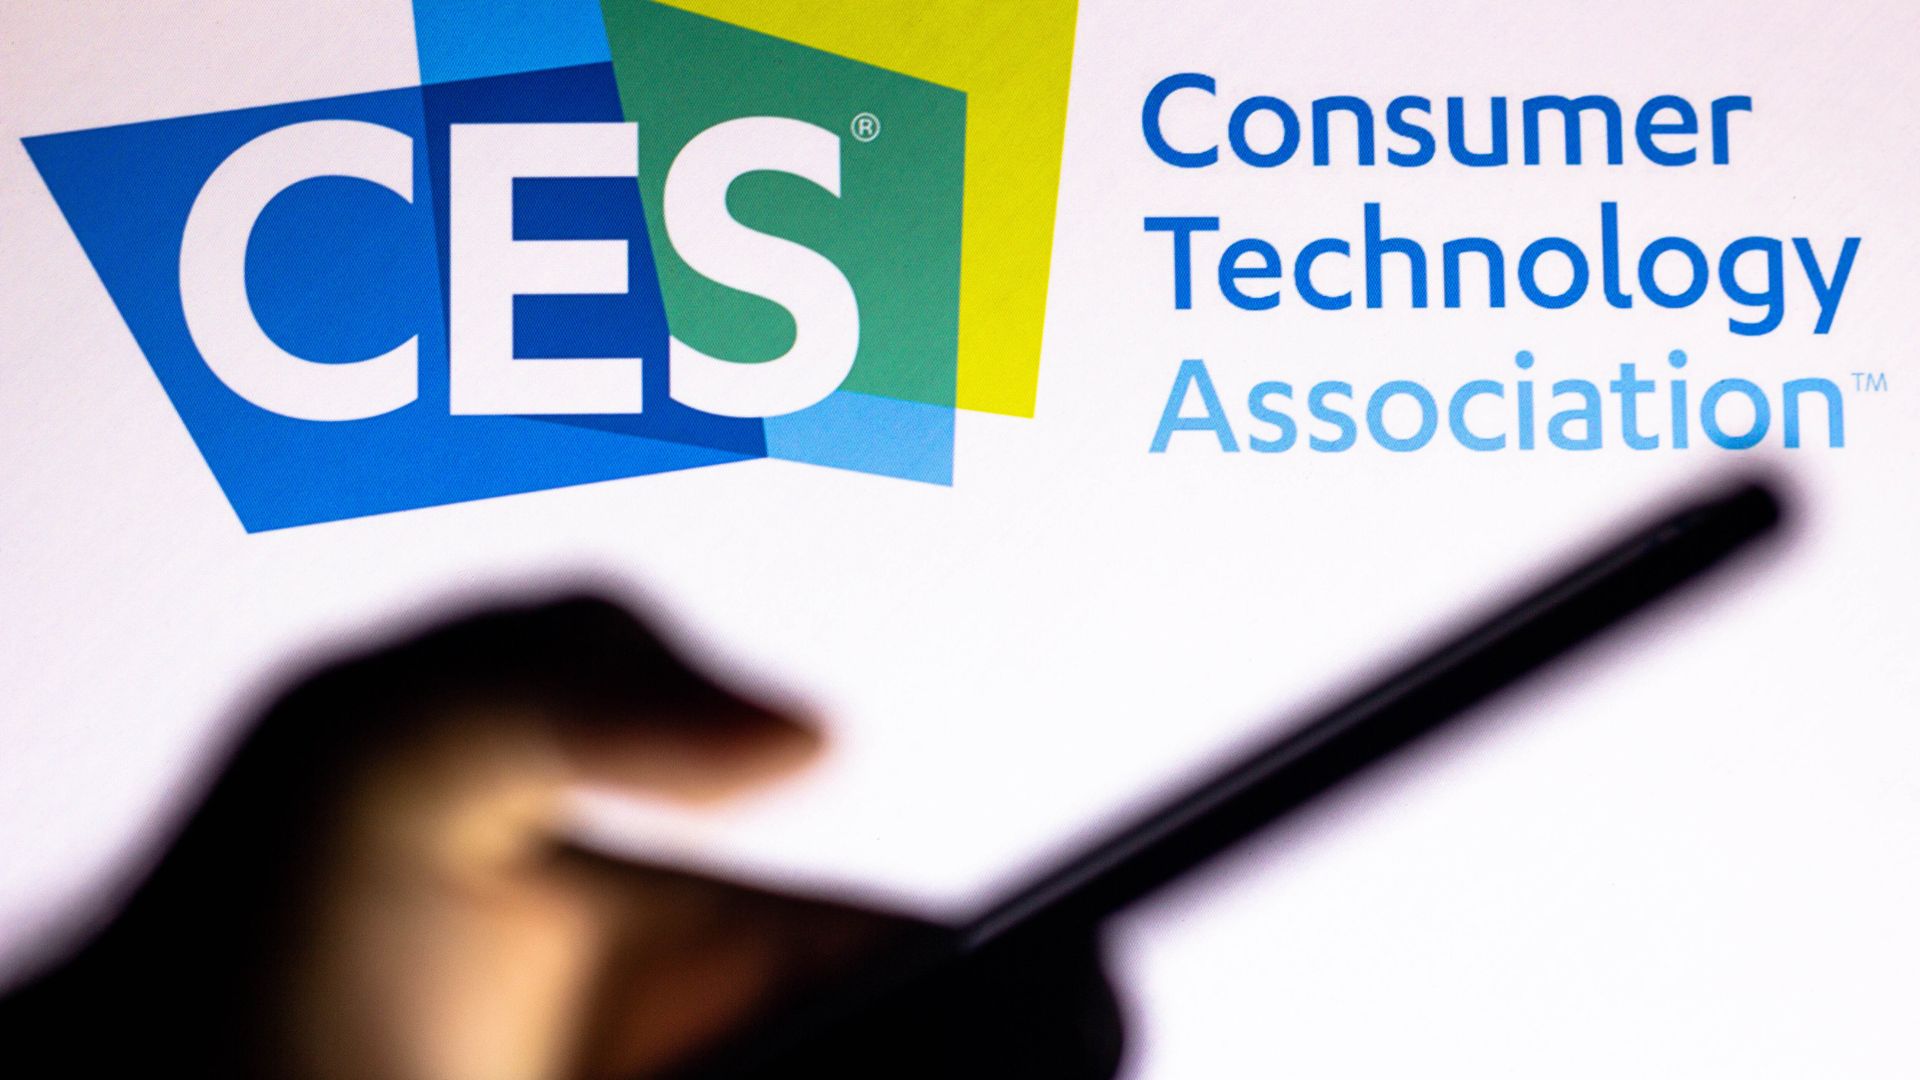 The shadow of a hand and smartphone are seen in front of the CES logo